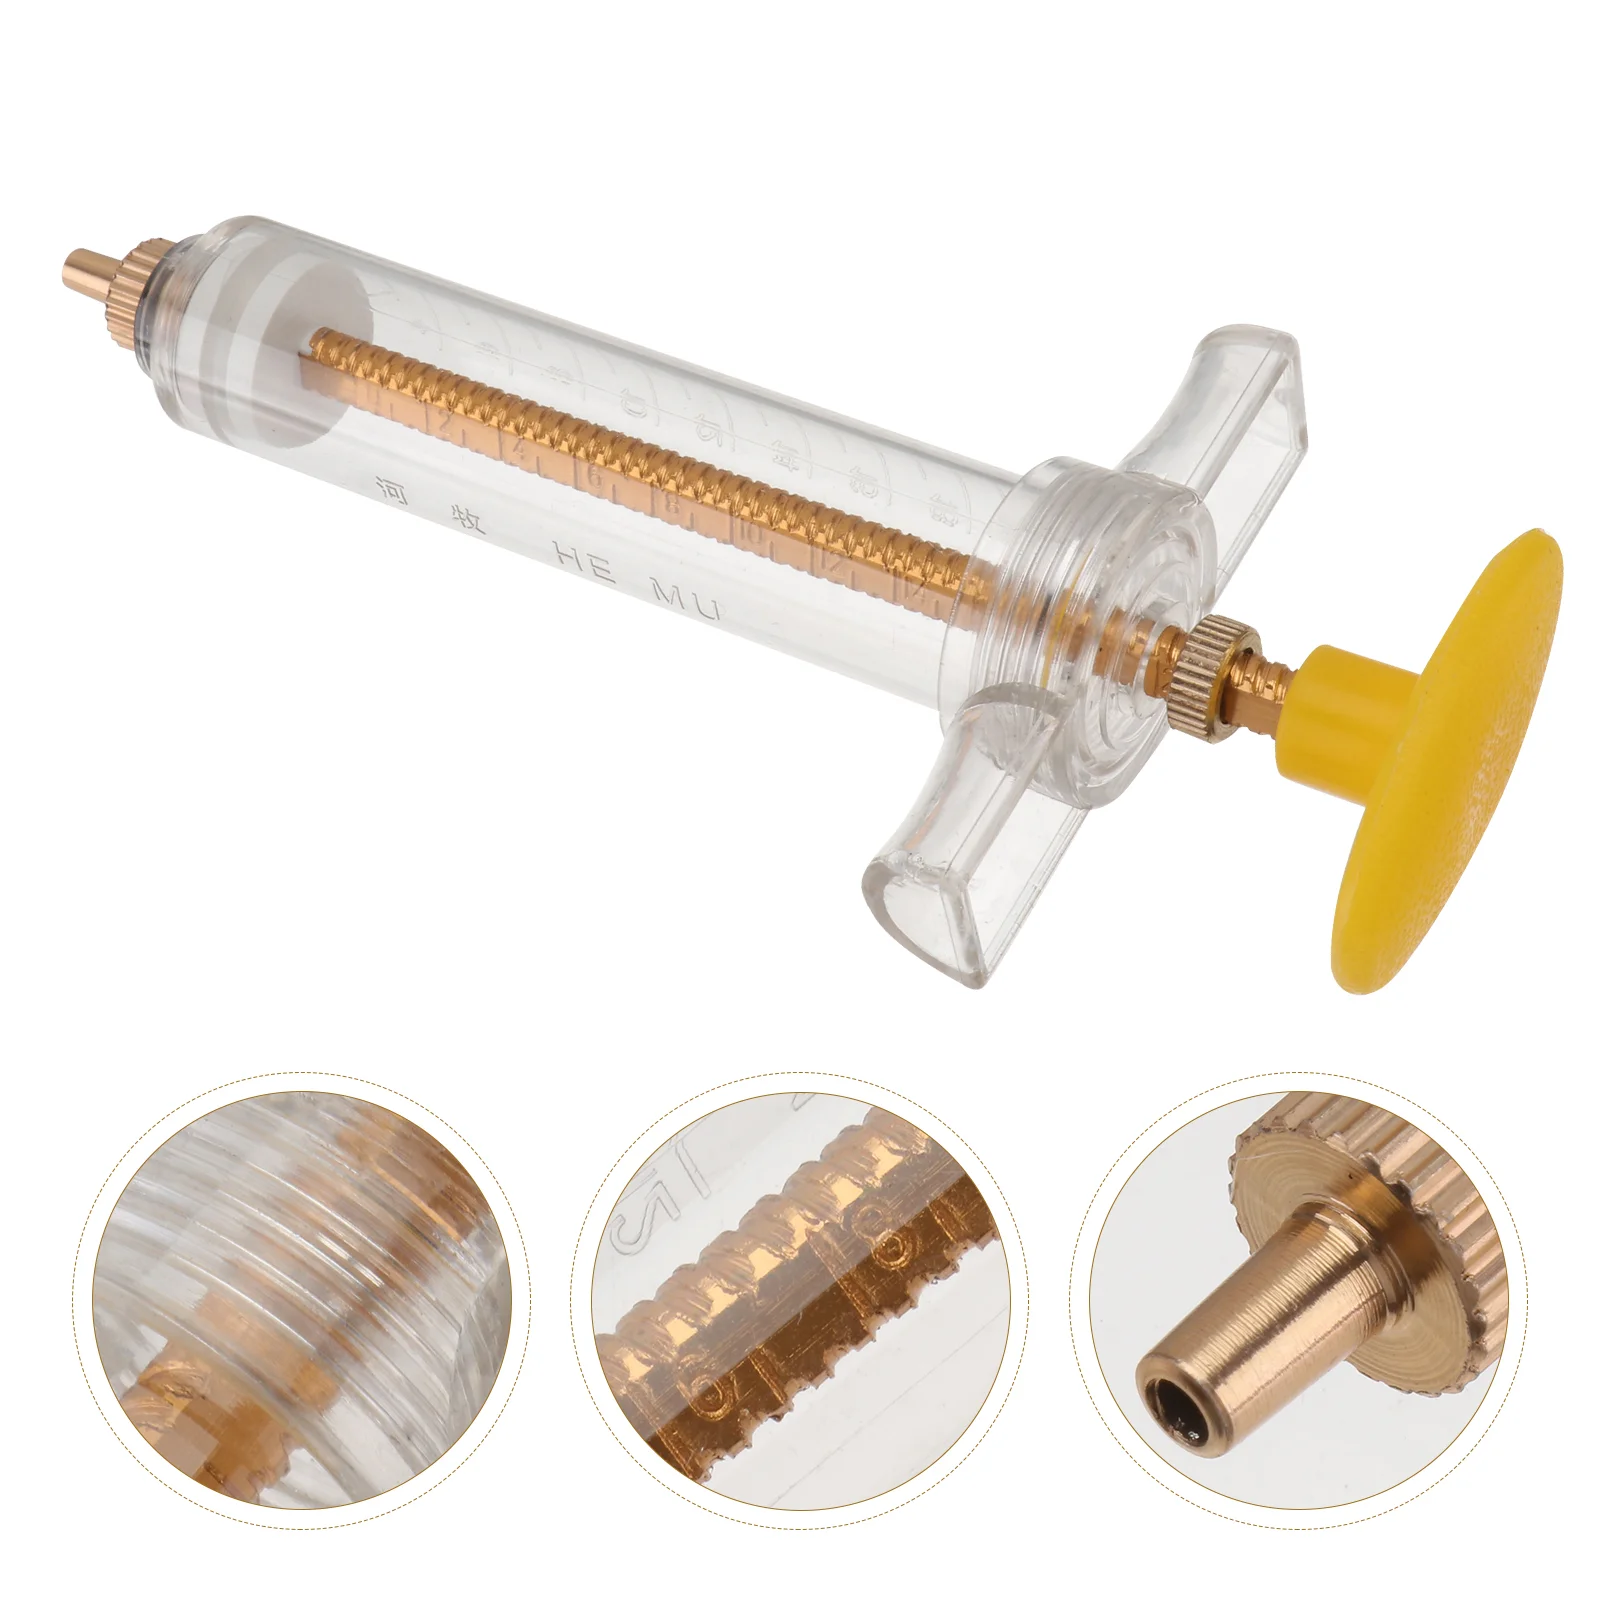 

Stick Making Maker Extruder Tool Coil Squeezing Device Squeezer Mold Diy Manual Press Kit Mould Cone Convenient Clay Tools